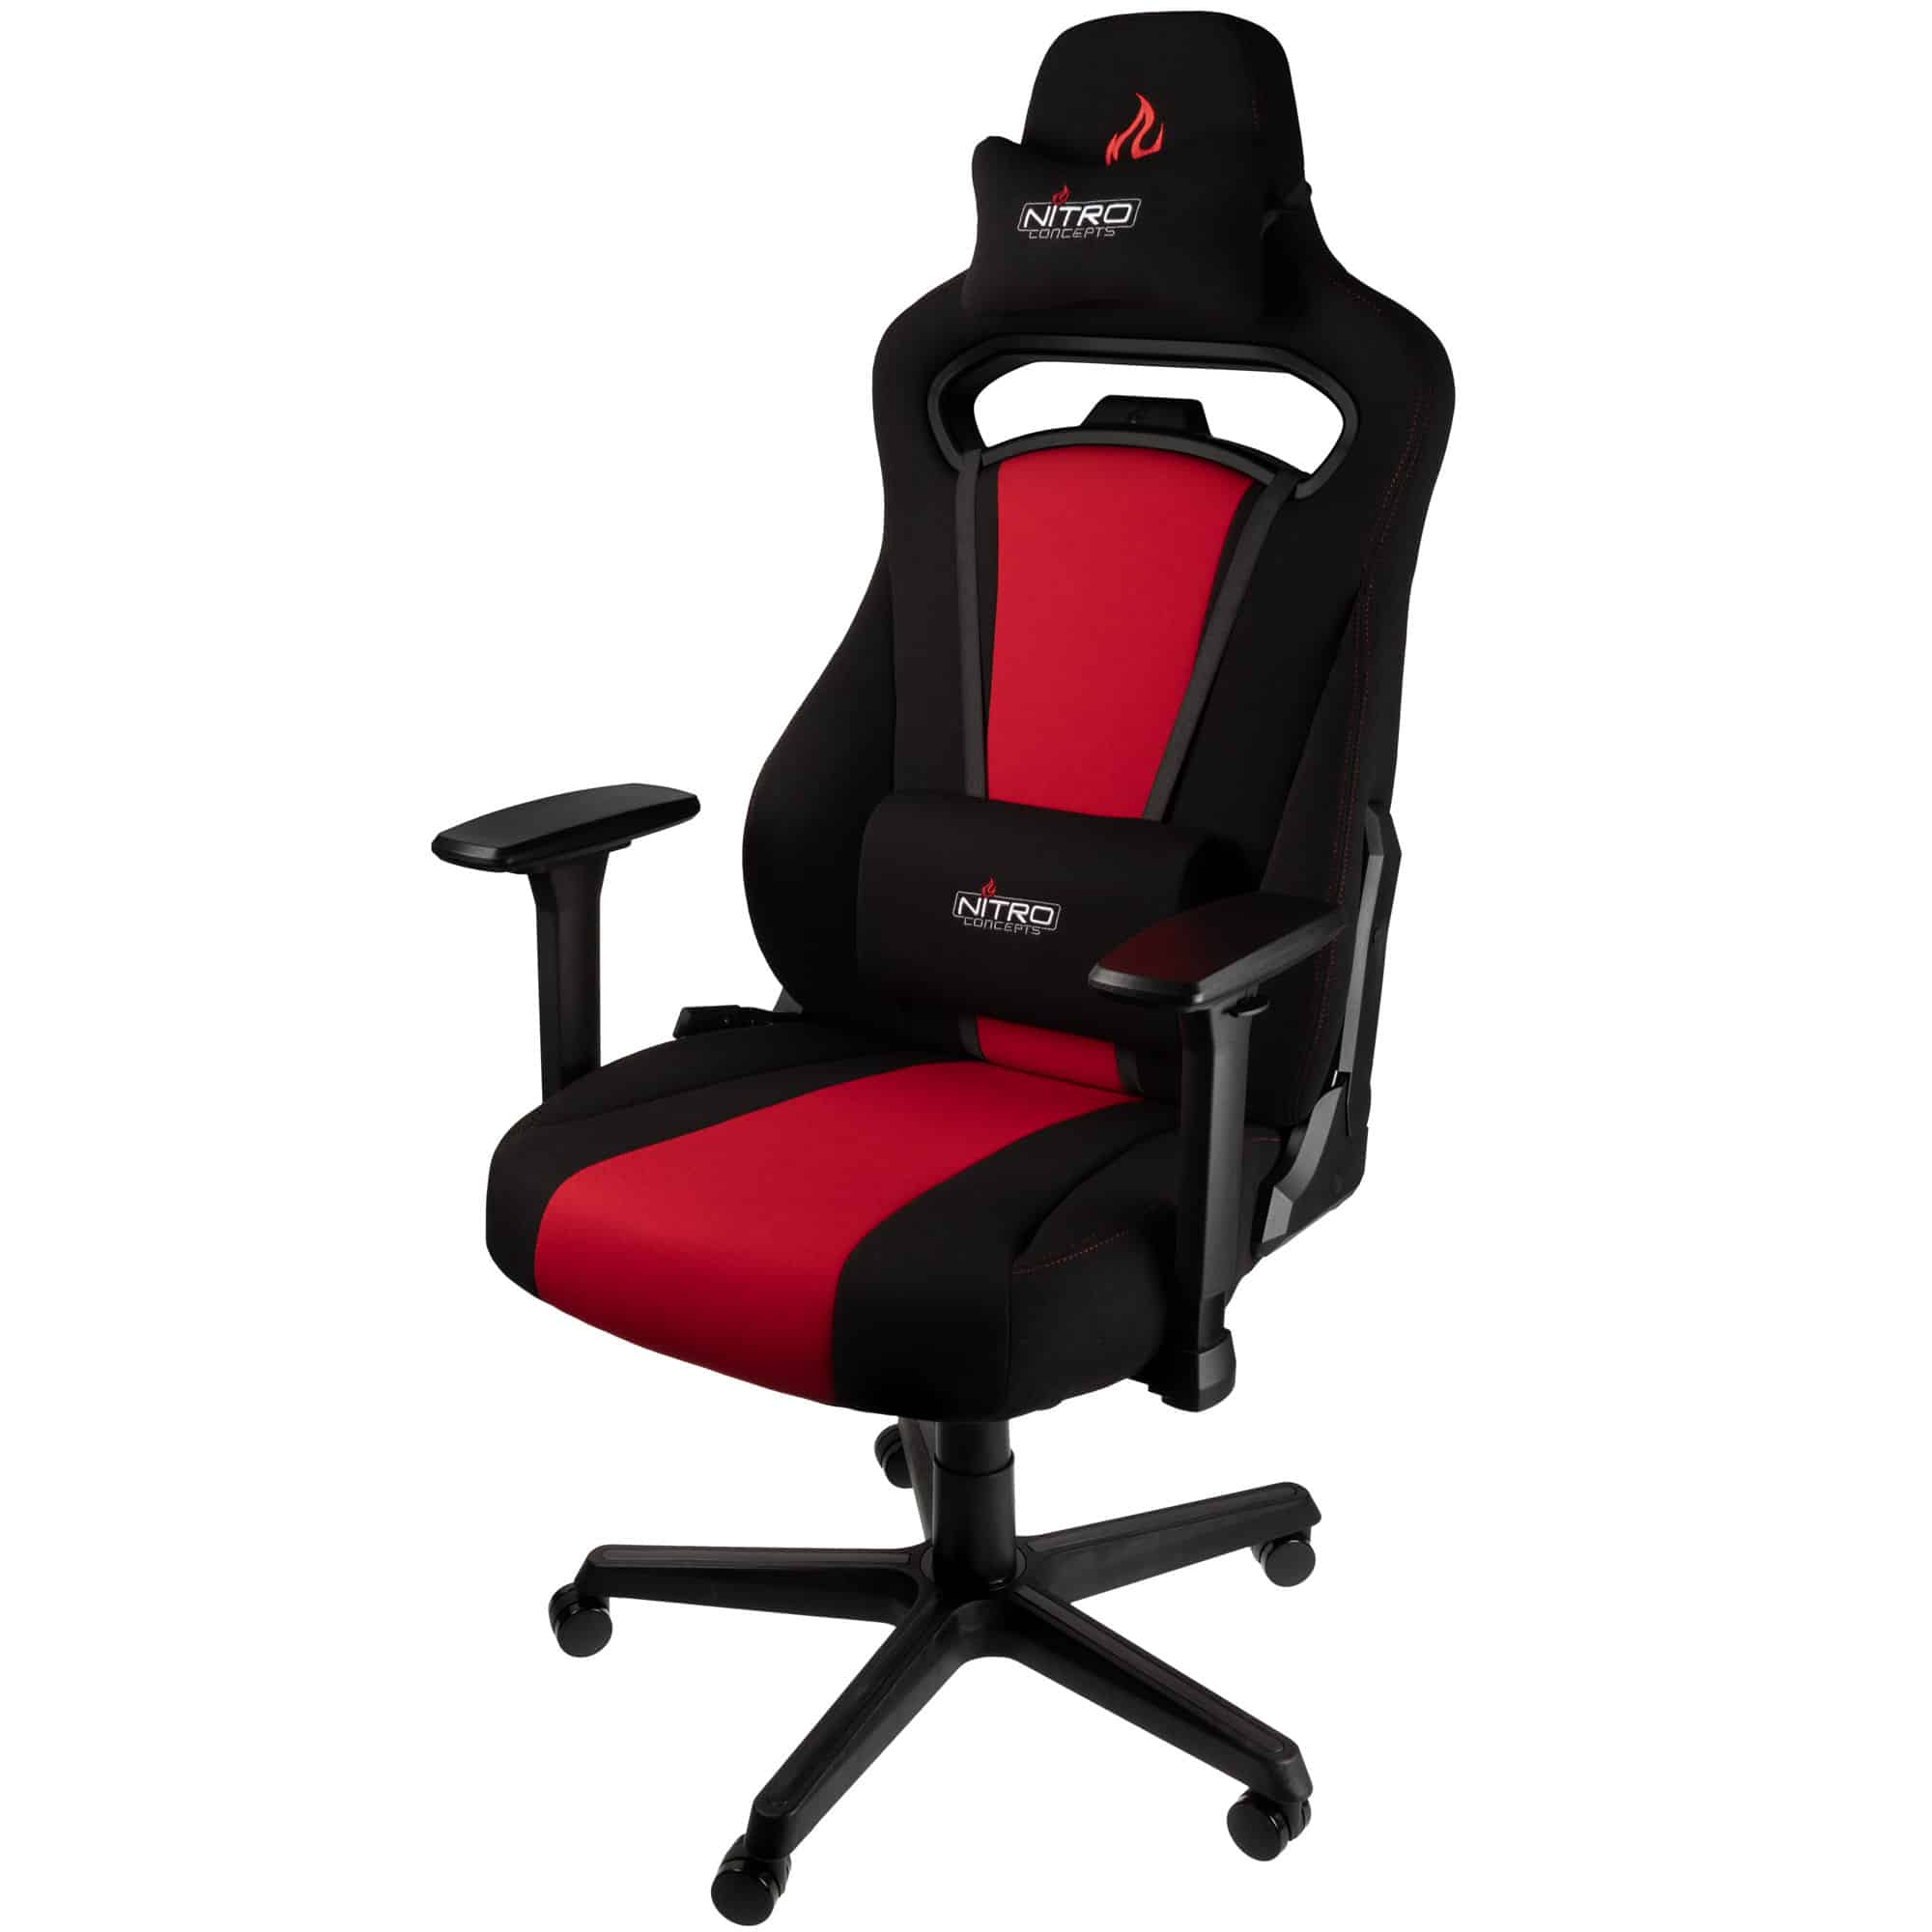 Nitro Concepts E250 Gaming Chair-Black/Red - Store 974 | ستور ٩٧٤